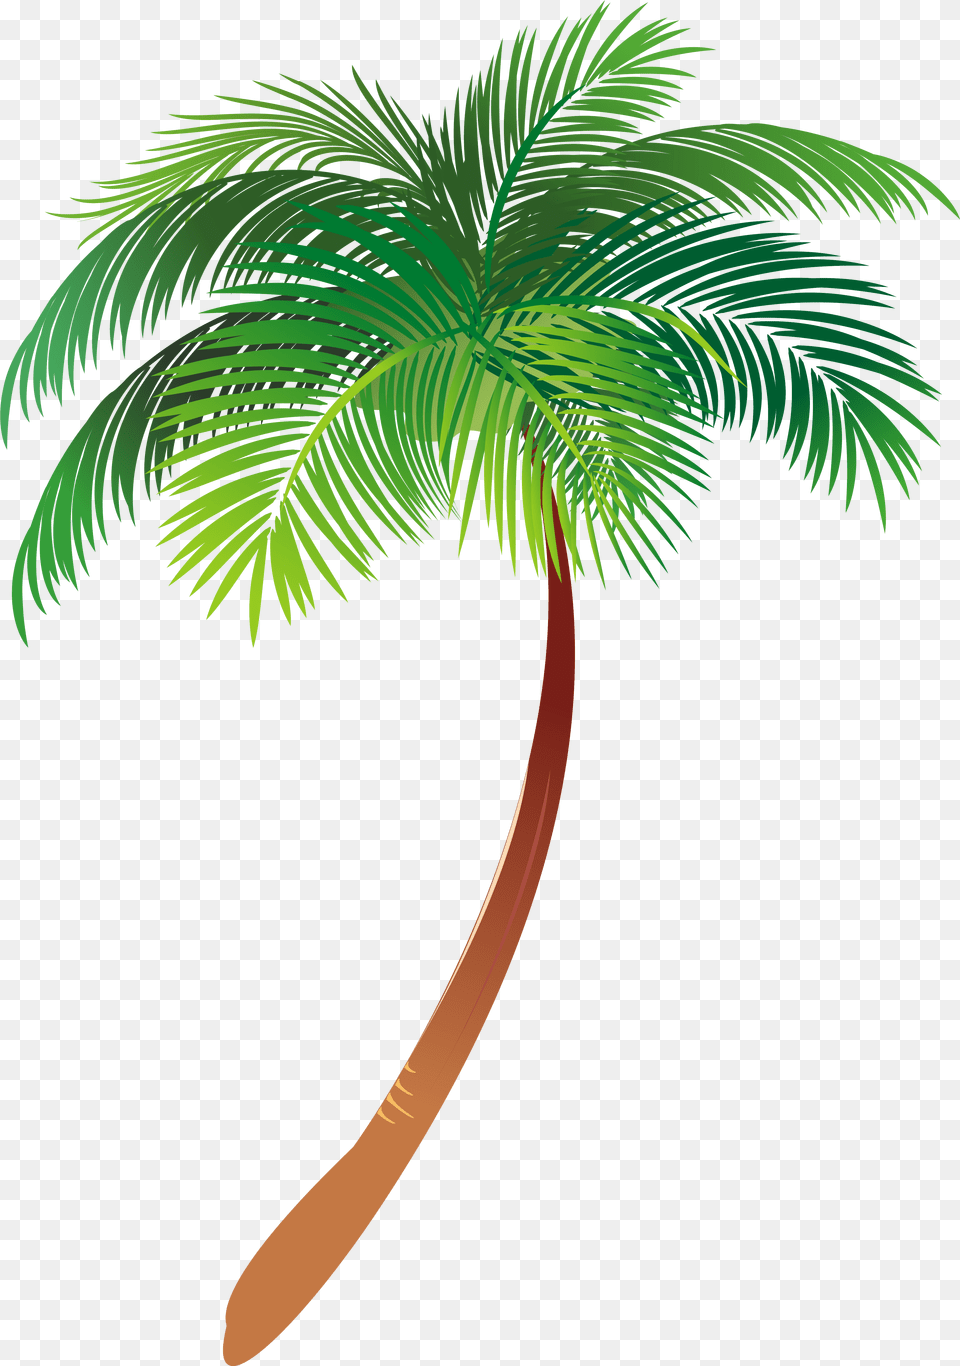 Asian Palmyra Palm Illustration Palm Trees Vector Graphics Coconut, Glass, Alcohol, Beverage, Liquor Png Image